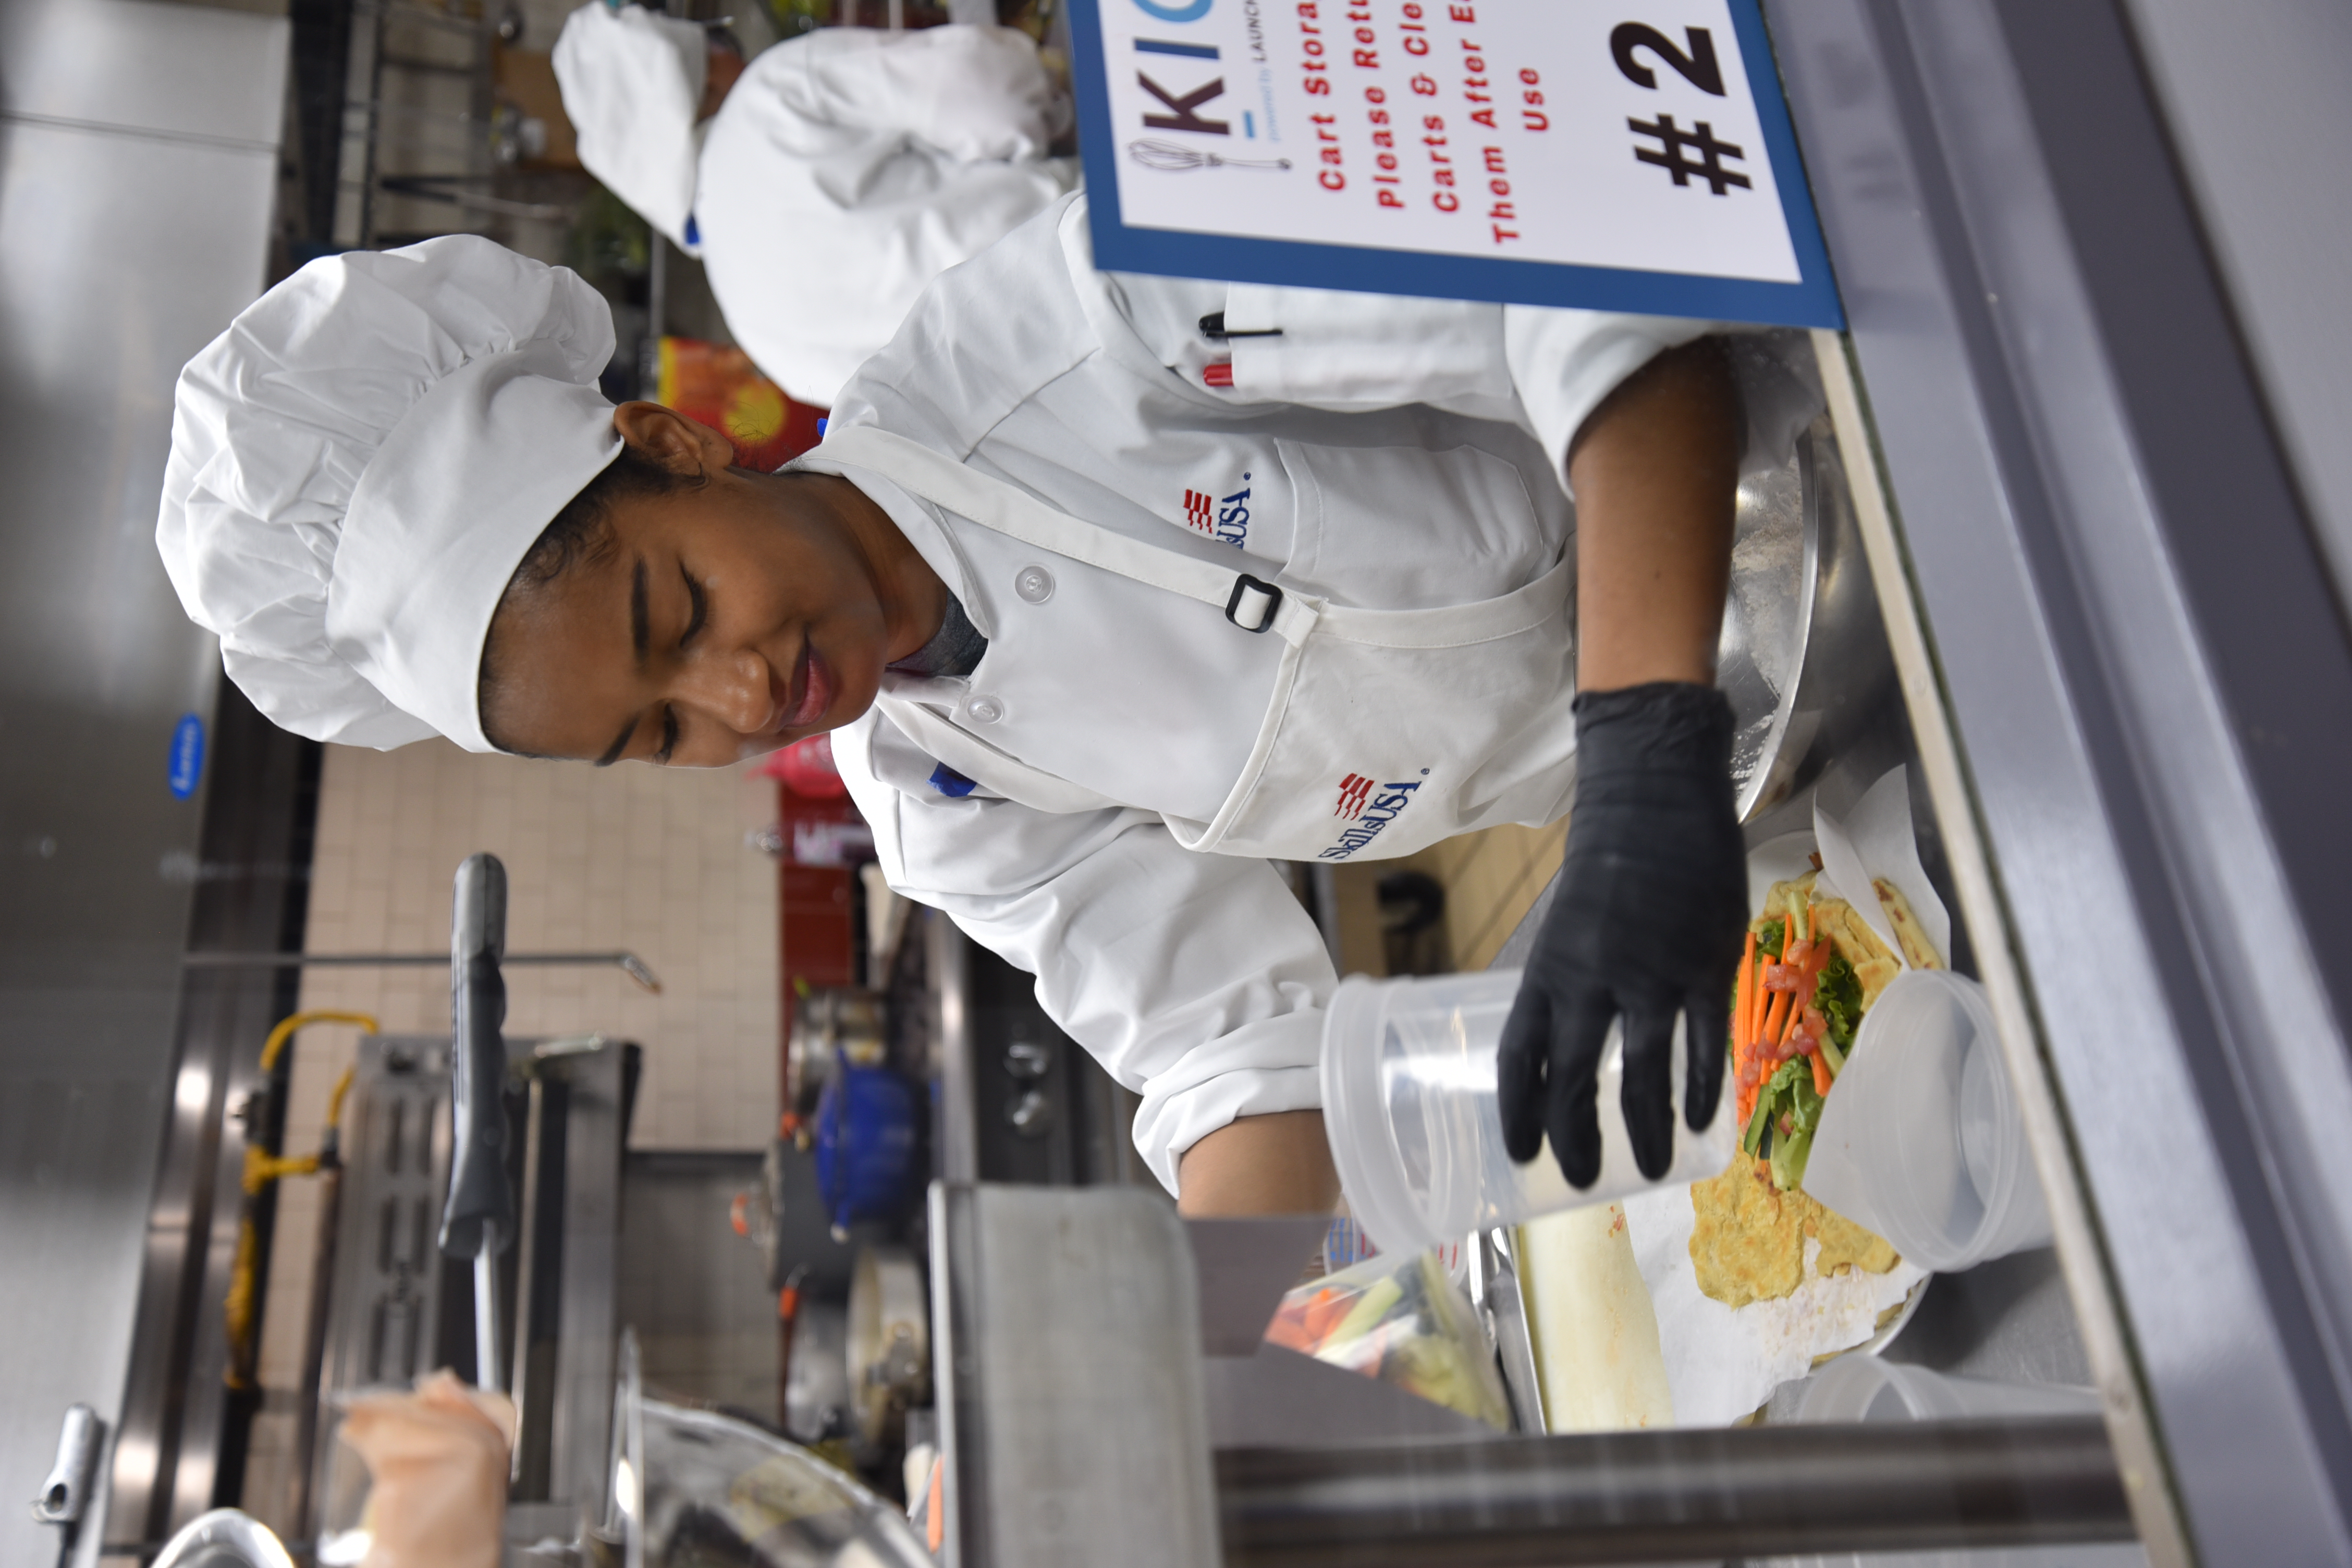 A SkillsUSA Culinary competitor in a chef's hat prepares food.